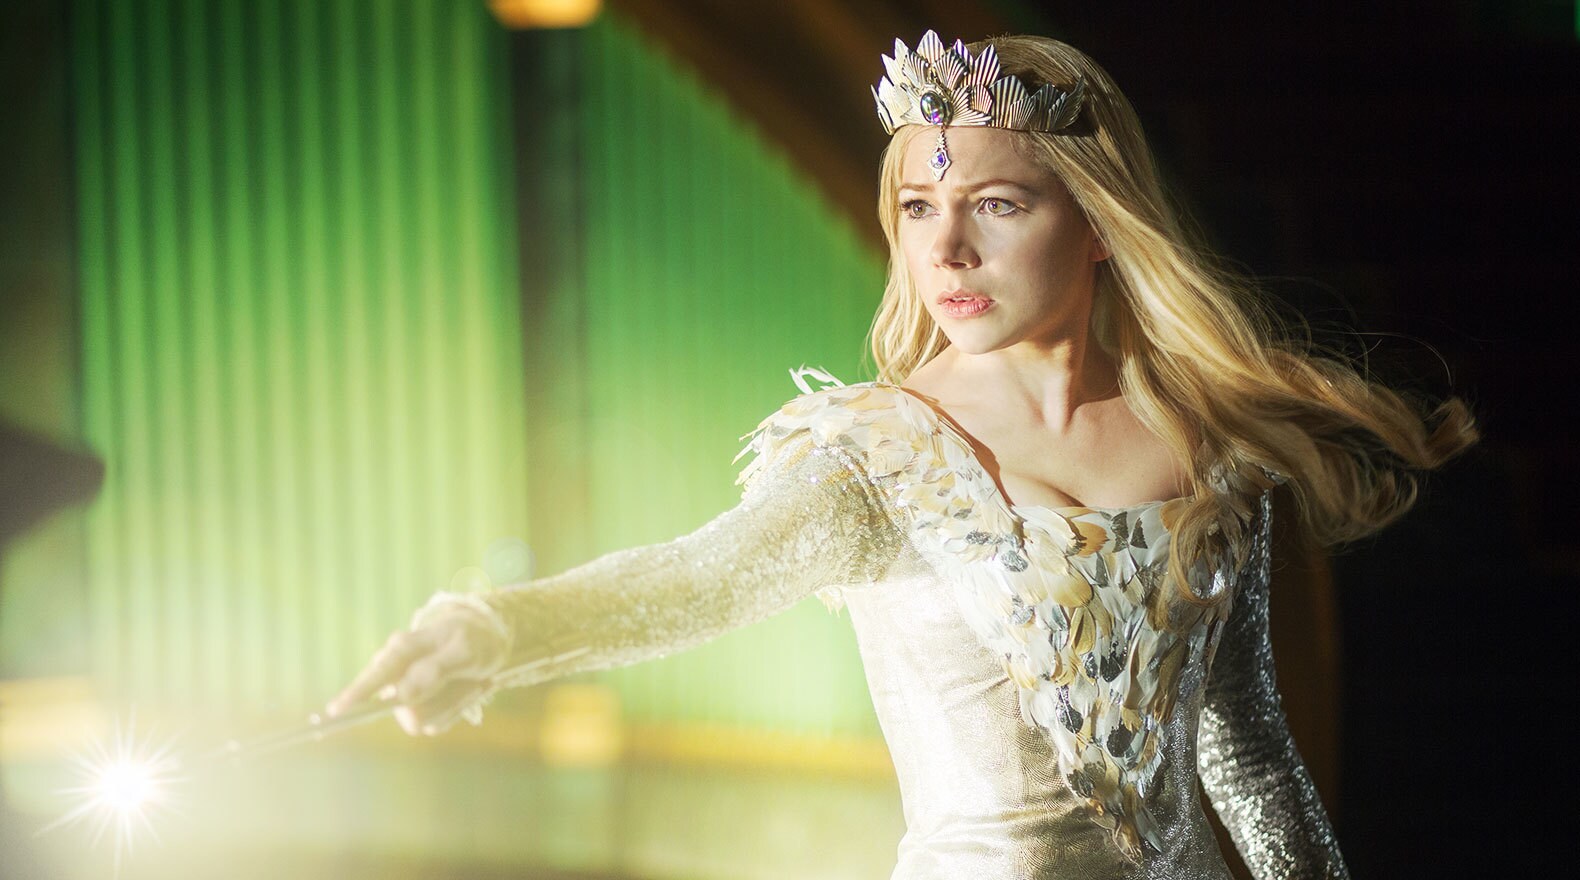 Michelle Williams in "Oz the Great and Powerful"